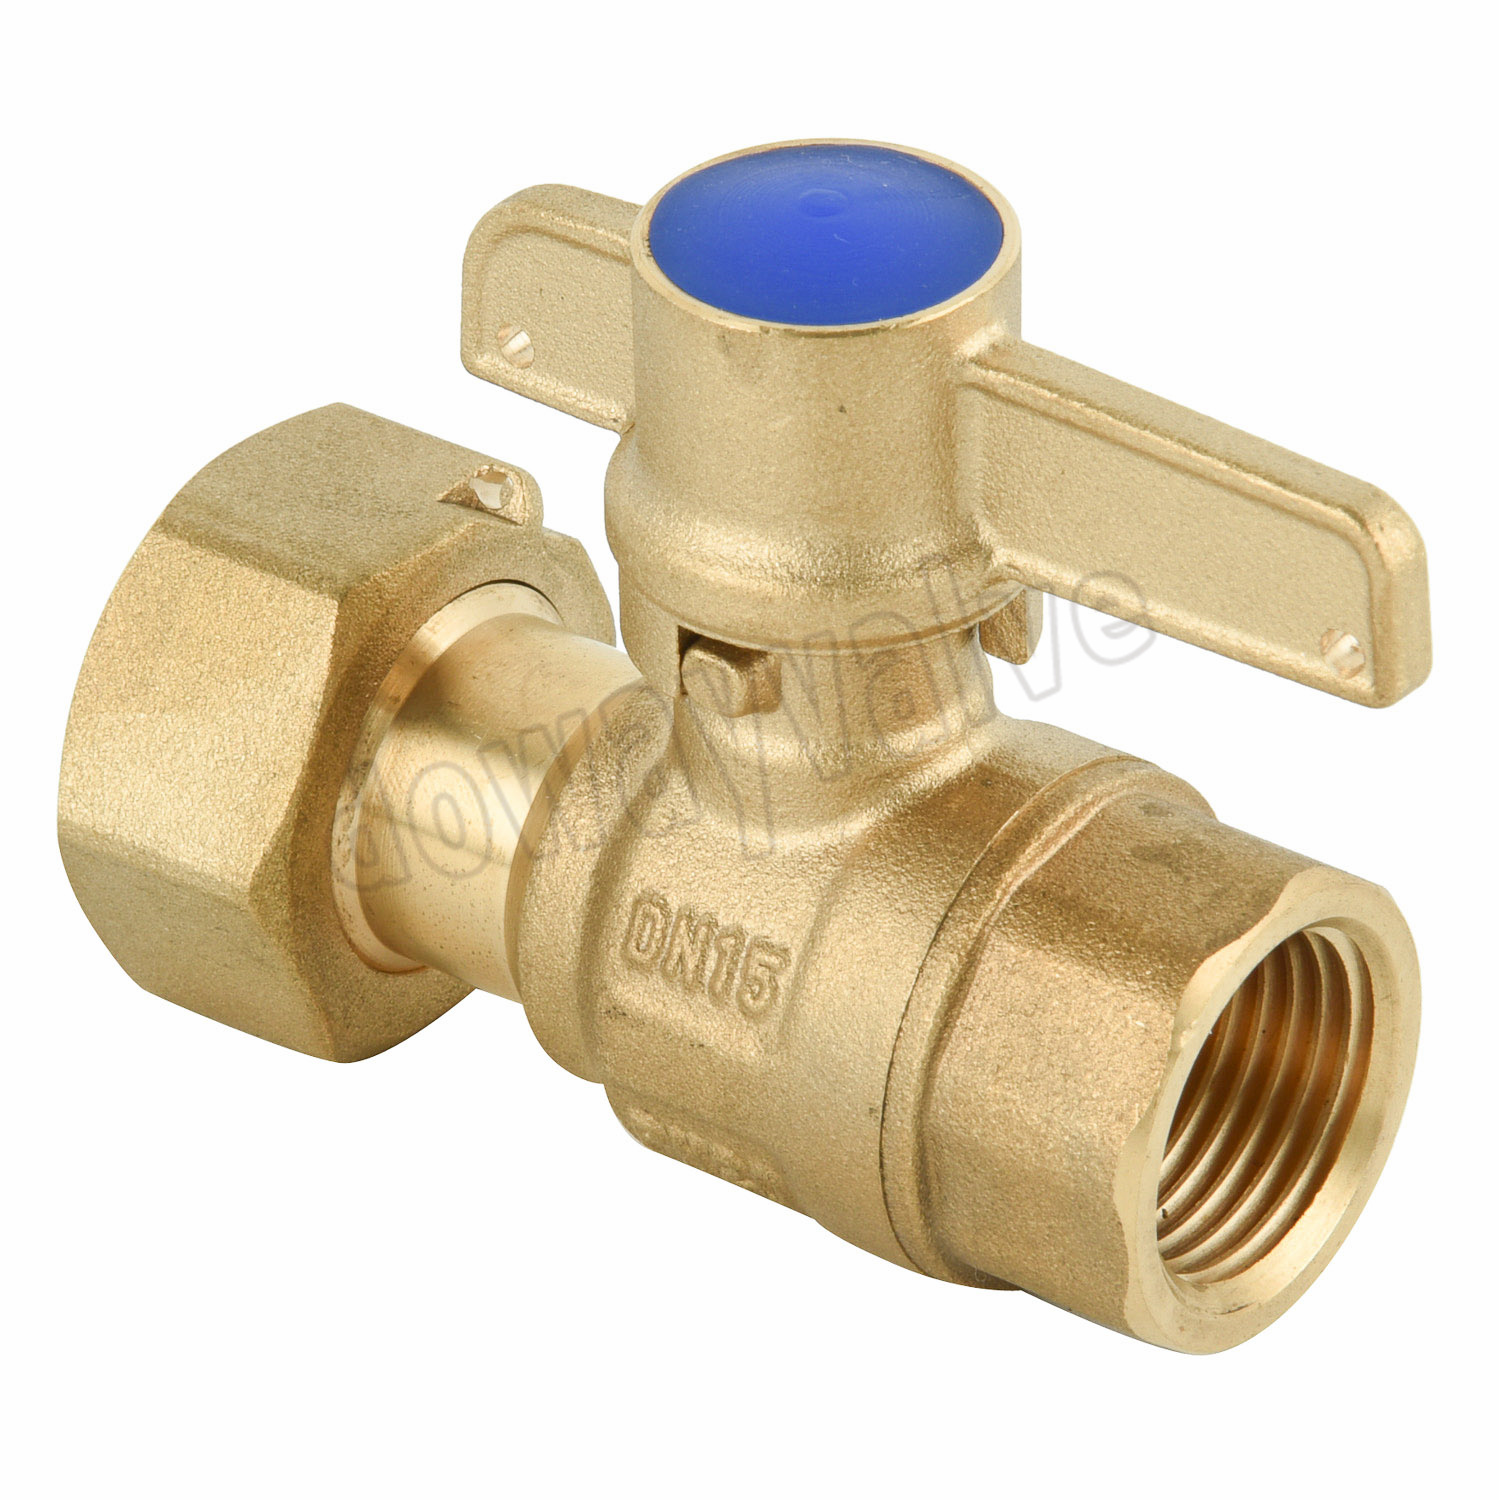 Acs Approval Straight Type Male Lockable Water Meter Ball Valve PE25 China Factory